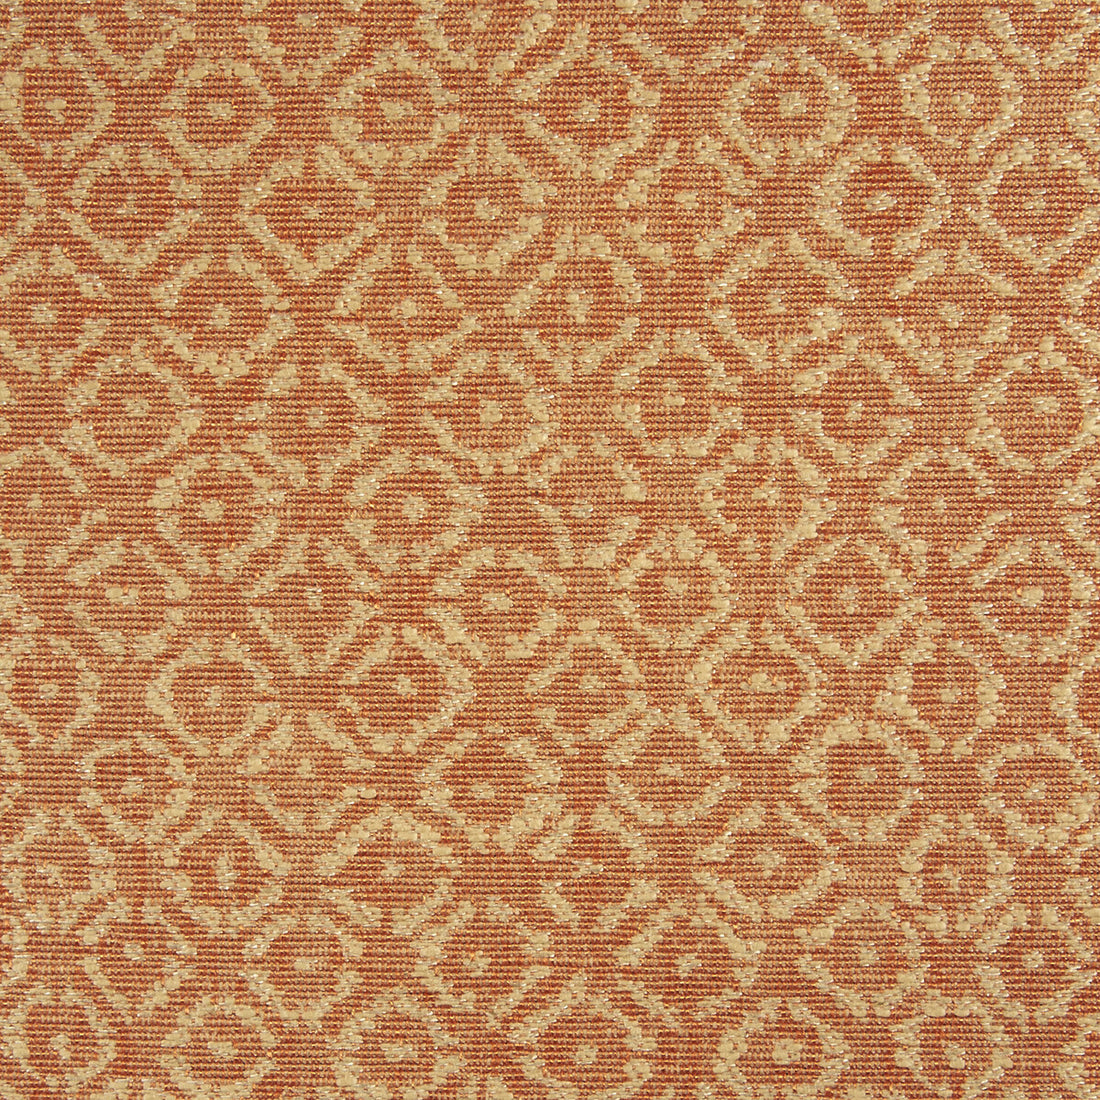 Albemarle fabric in tangerine color - pattern BFC-3637.12.0 - by Lee Jofa in the Blithfield collection